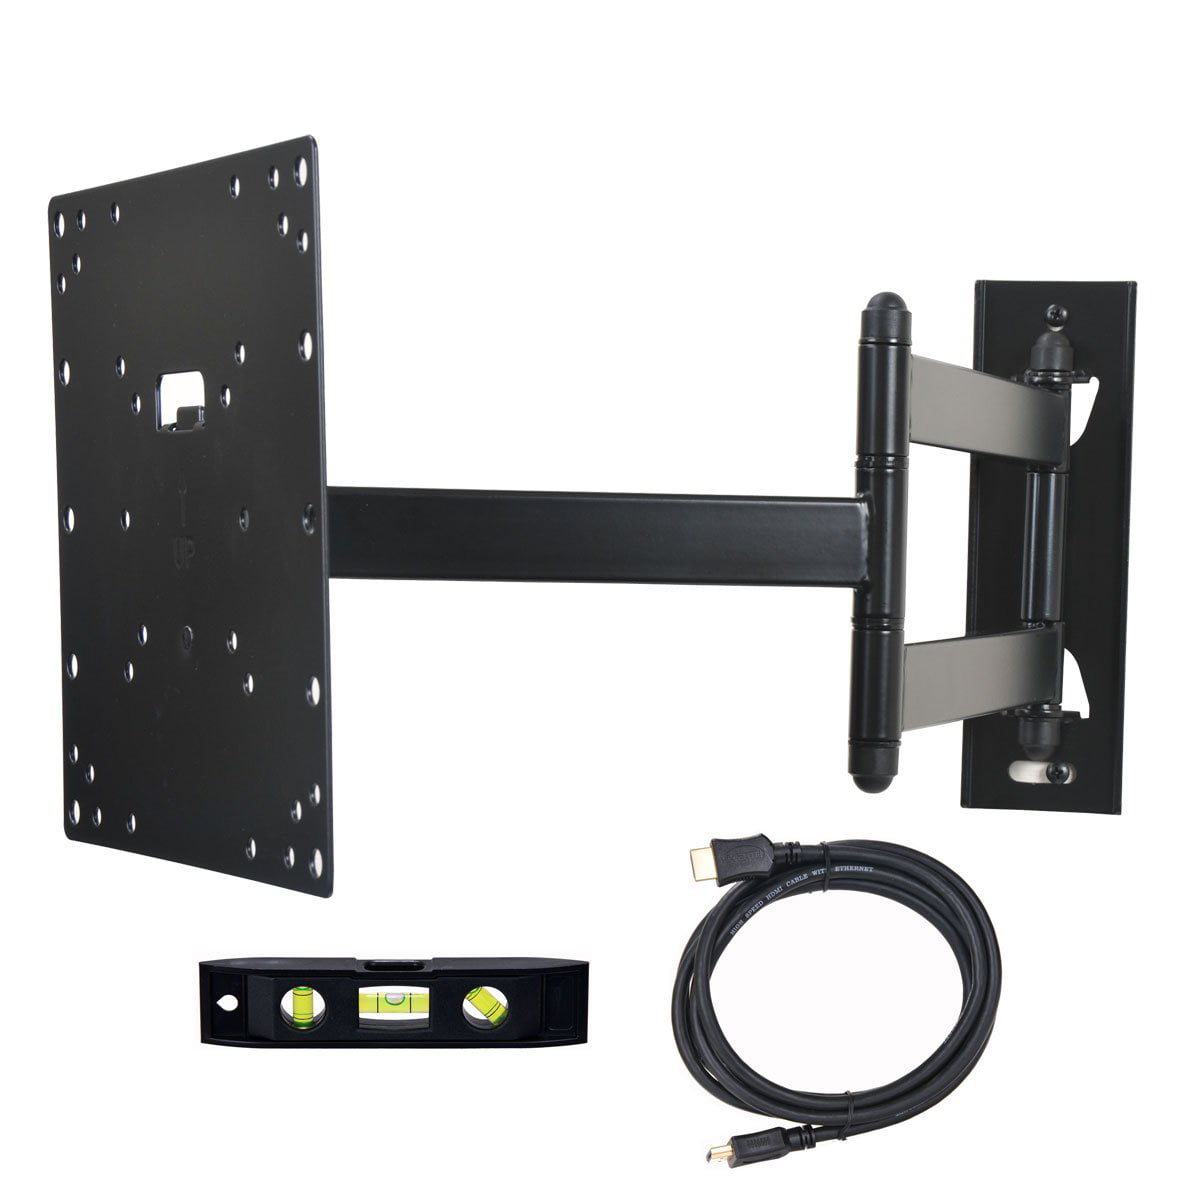 Black Adjustable Tilt/Tilting Wall Mount Bracket with Anti-Theft Feature for Westinghouse DWM32H1G1 32 inch LED HDTV TV/Television 